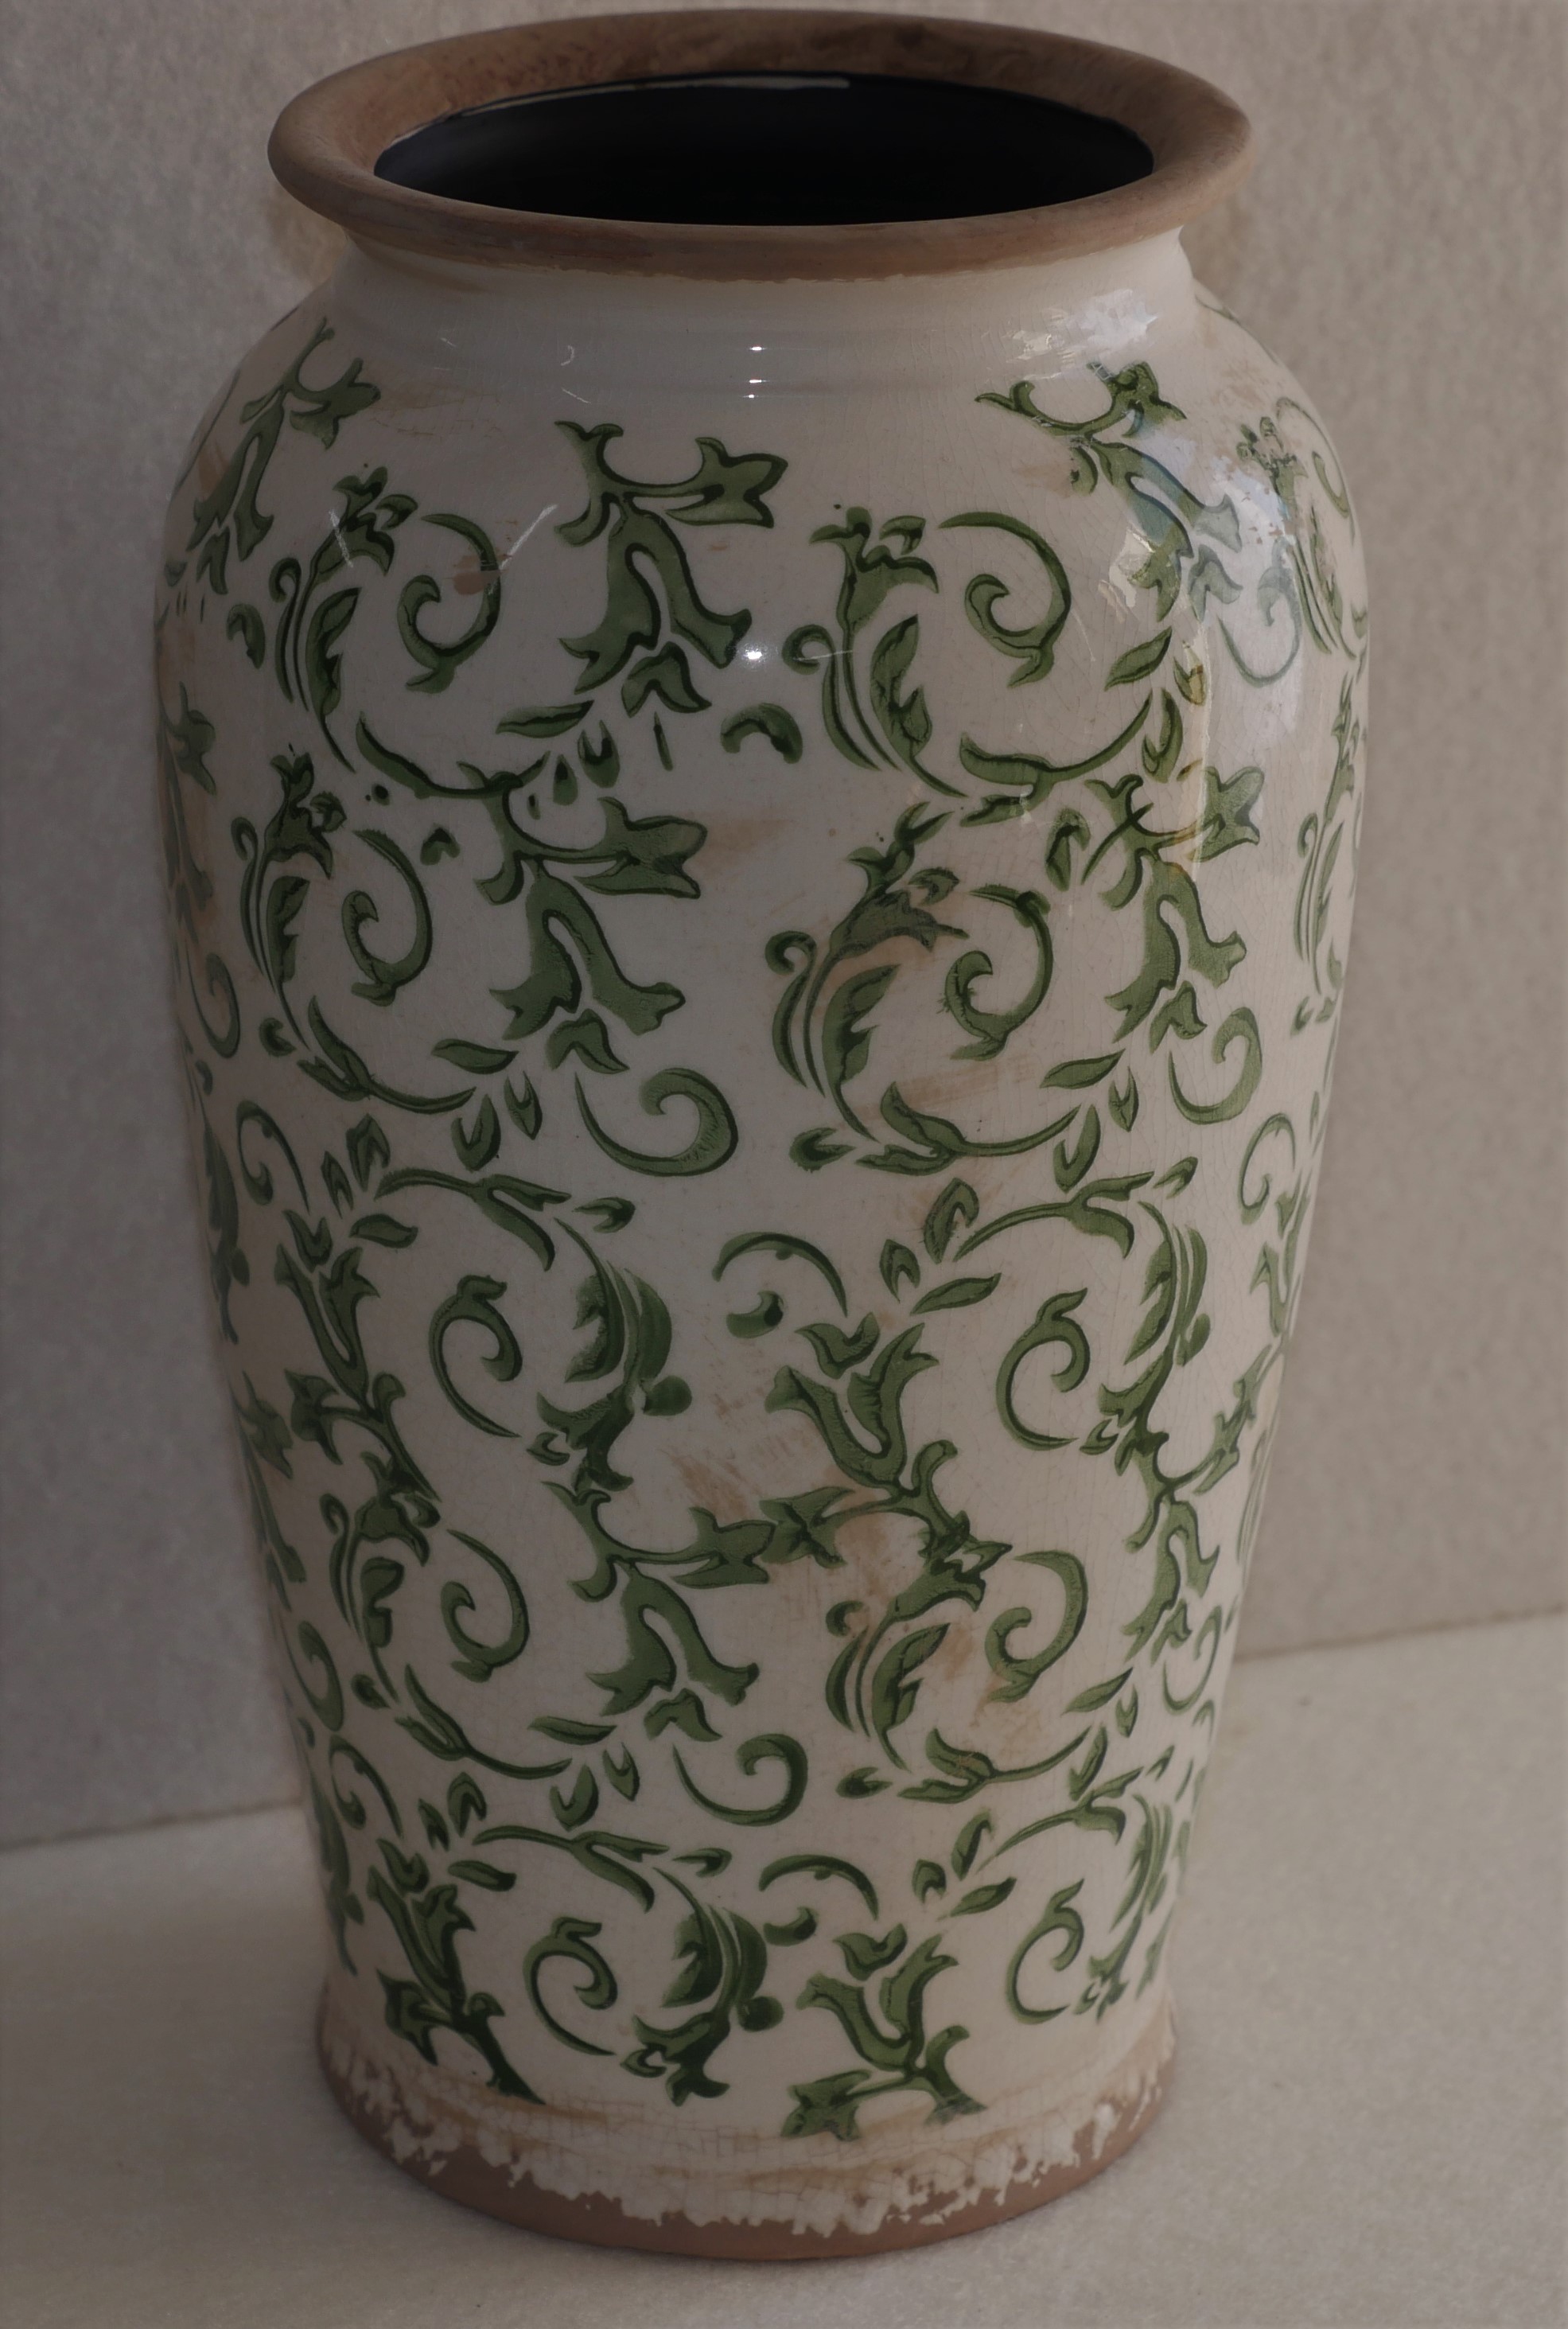 Green and white vintage look pottery vase.